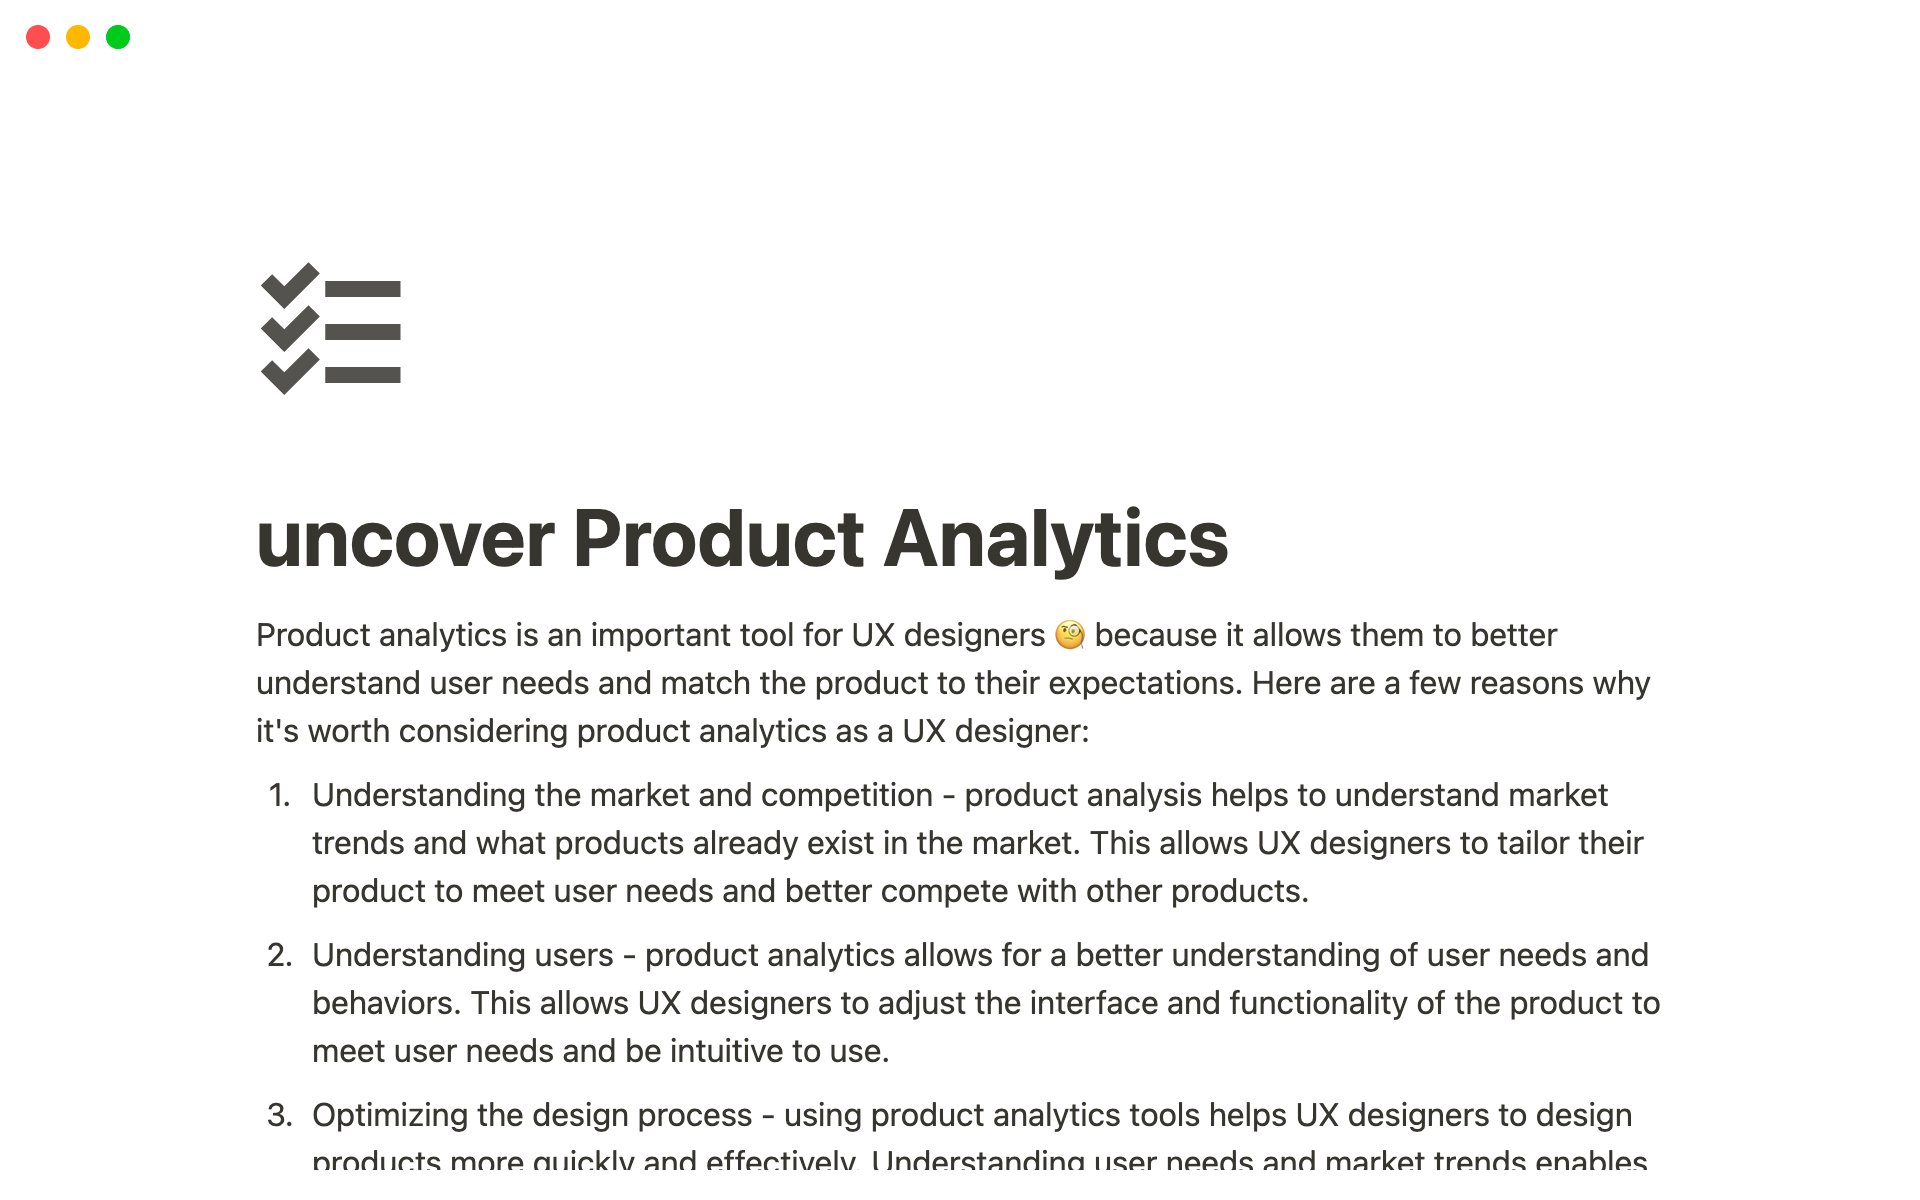 Learn to Collect and Analyze Quantitative Data with our uncover Product Analysis - Knowledge Base.